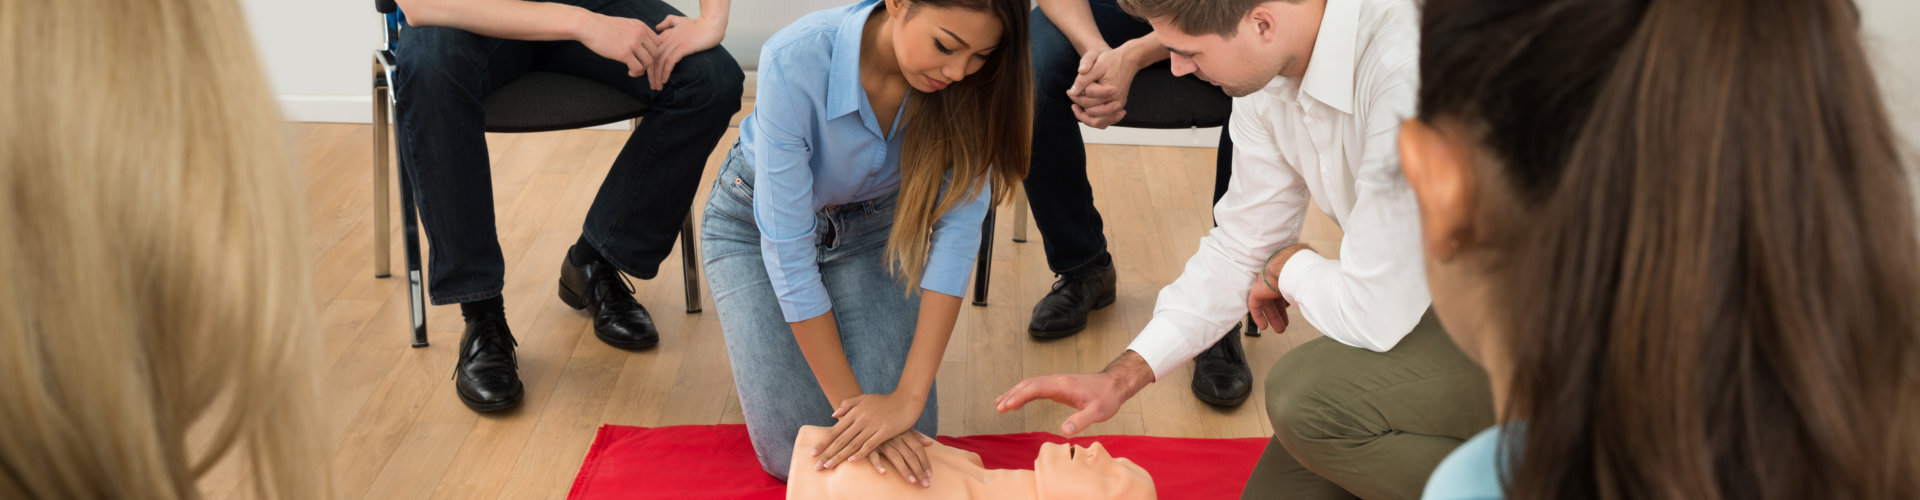 instructor teaching cpr